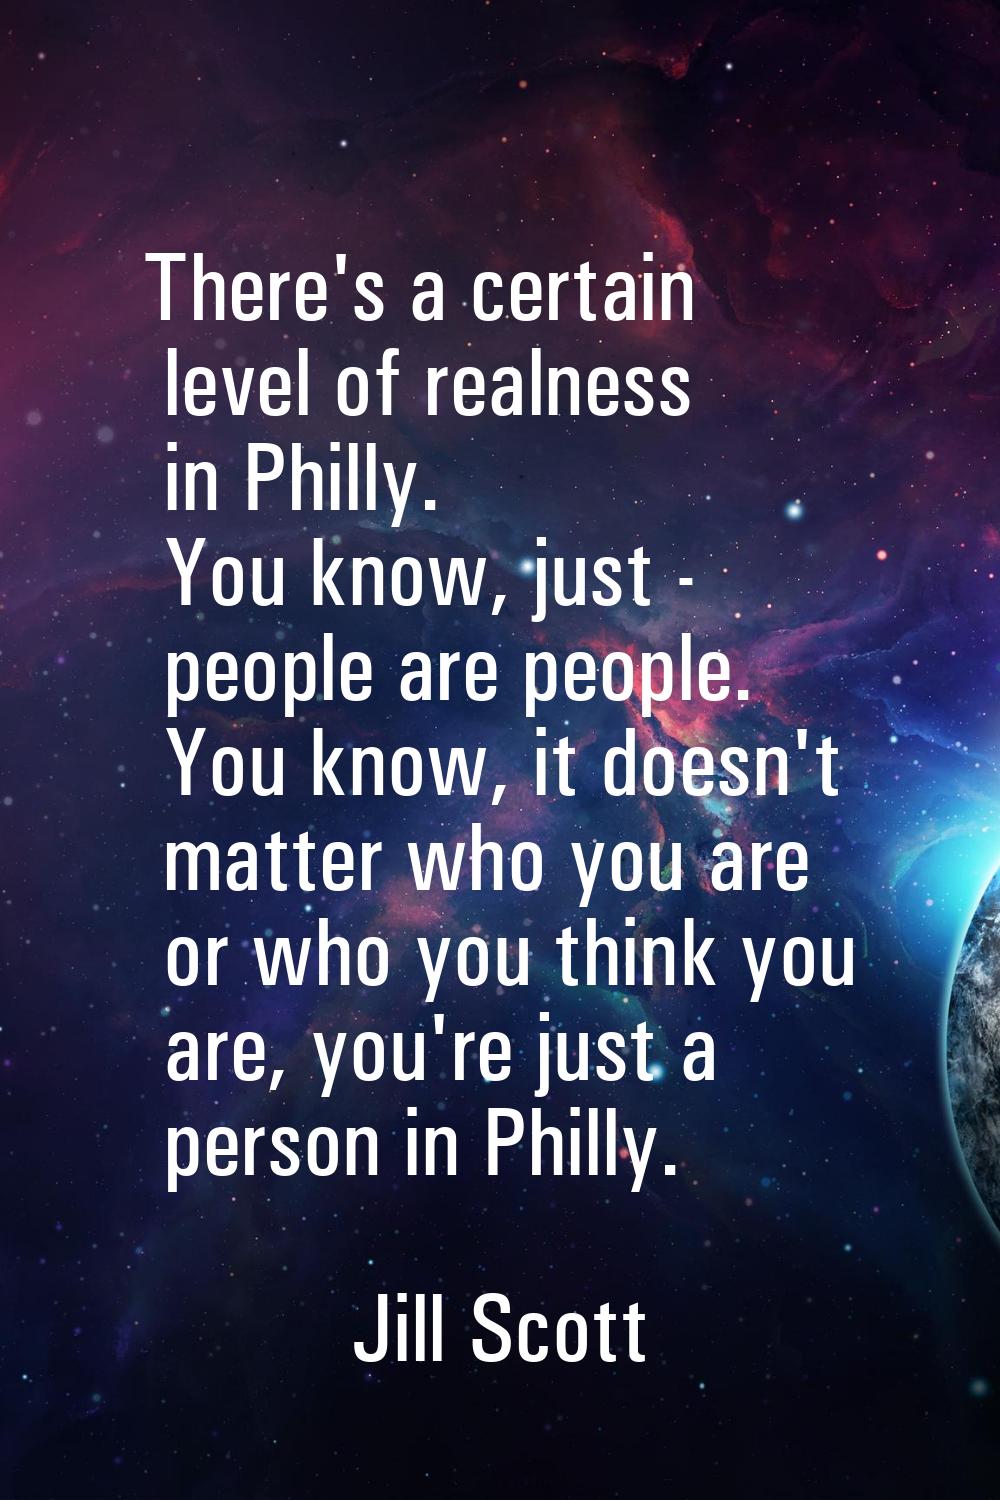 There's a certain level of realness in Philly. You know, just - people are people. You know, it doe